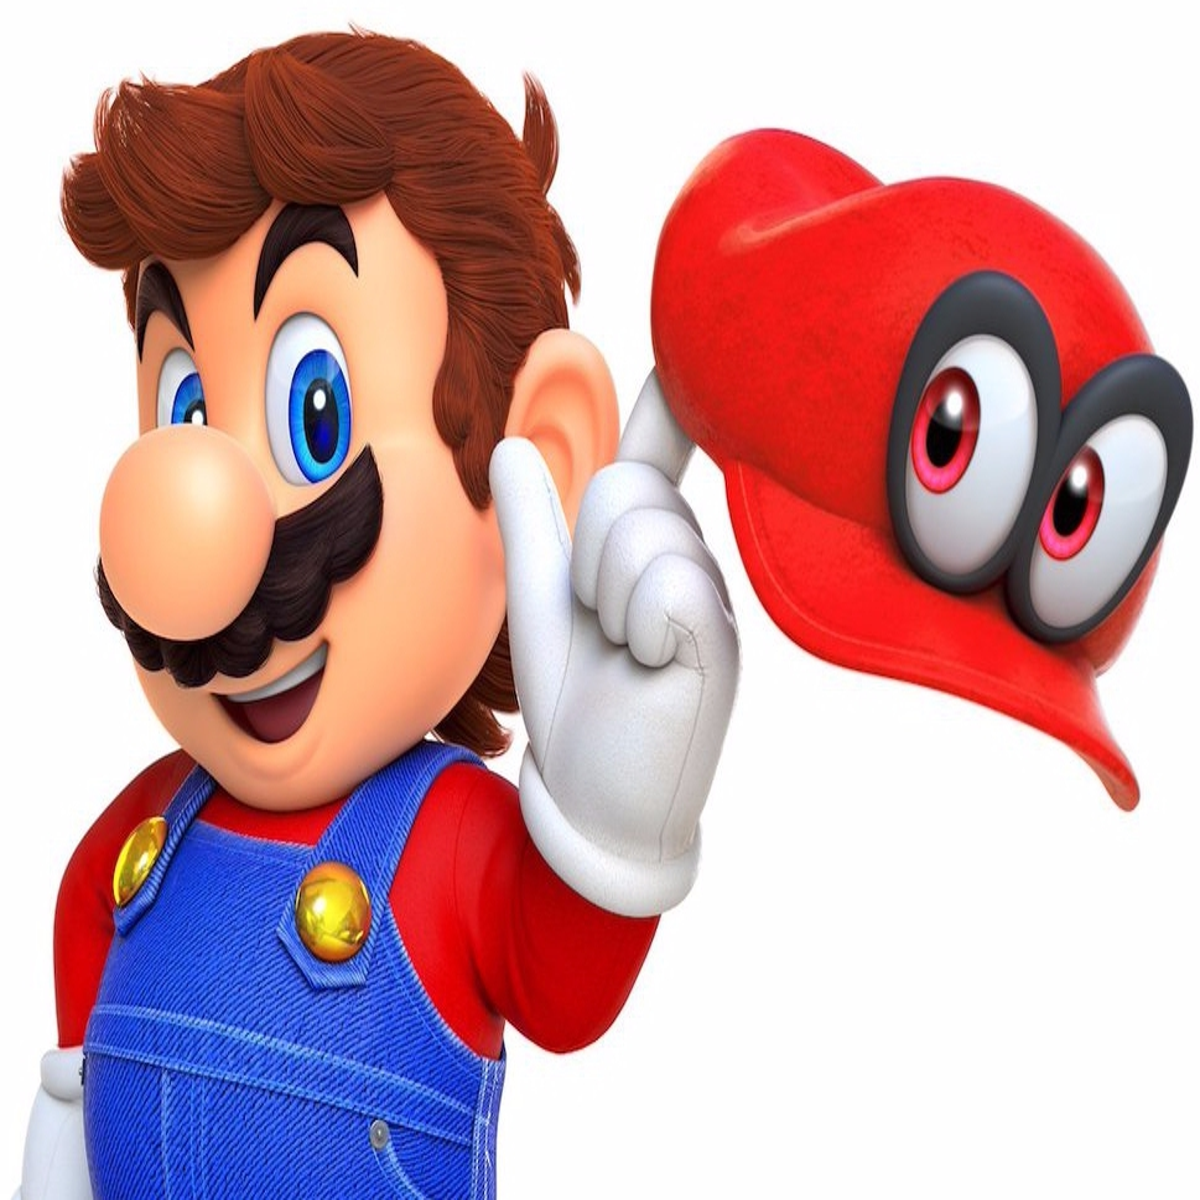 Will Mario Odyssey 2 Finally Release in 2023? 